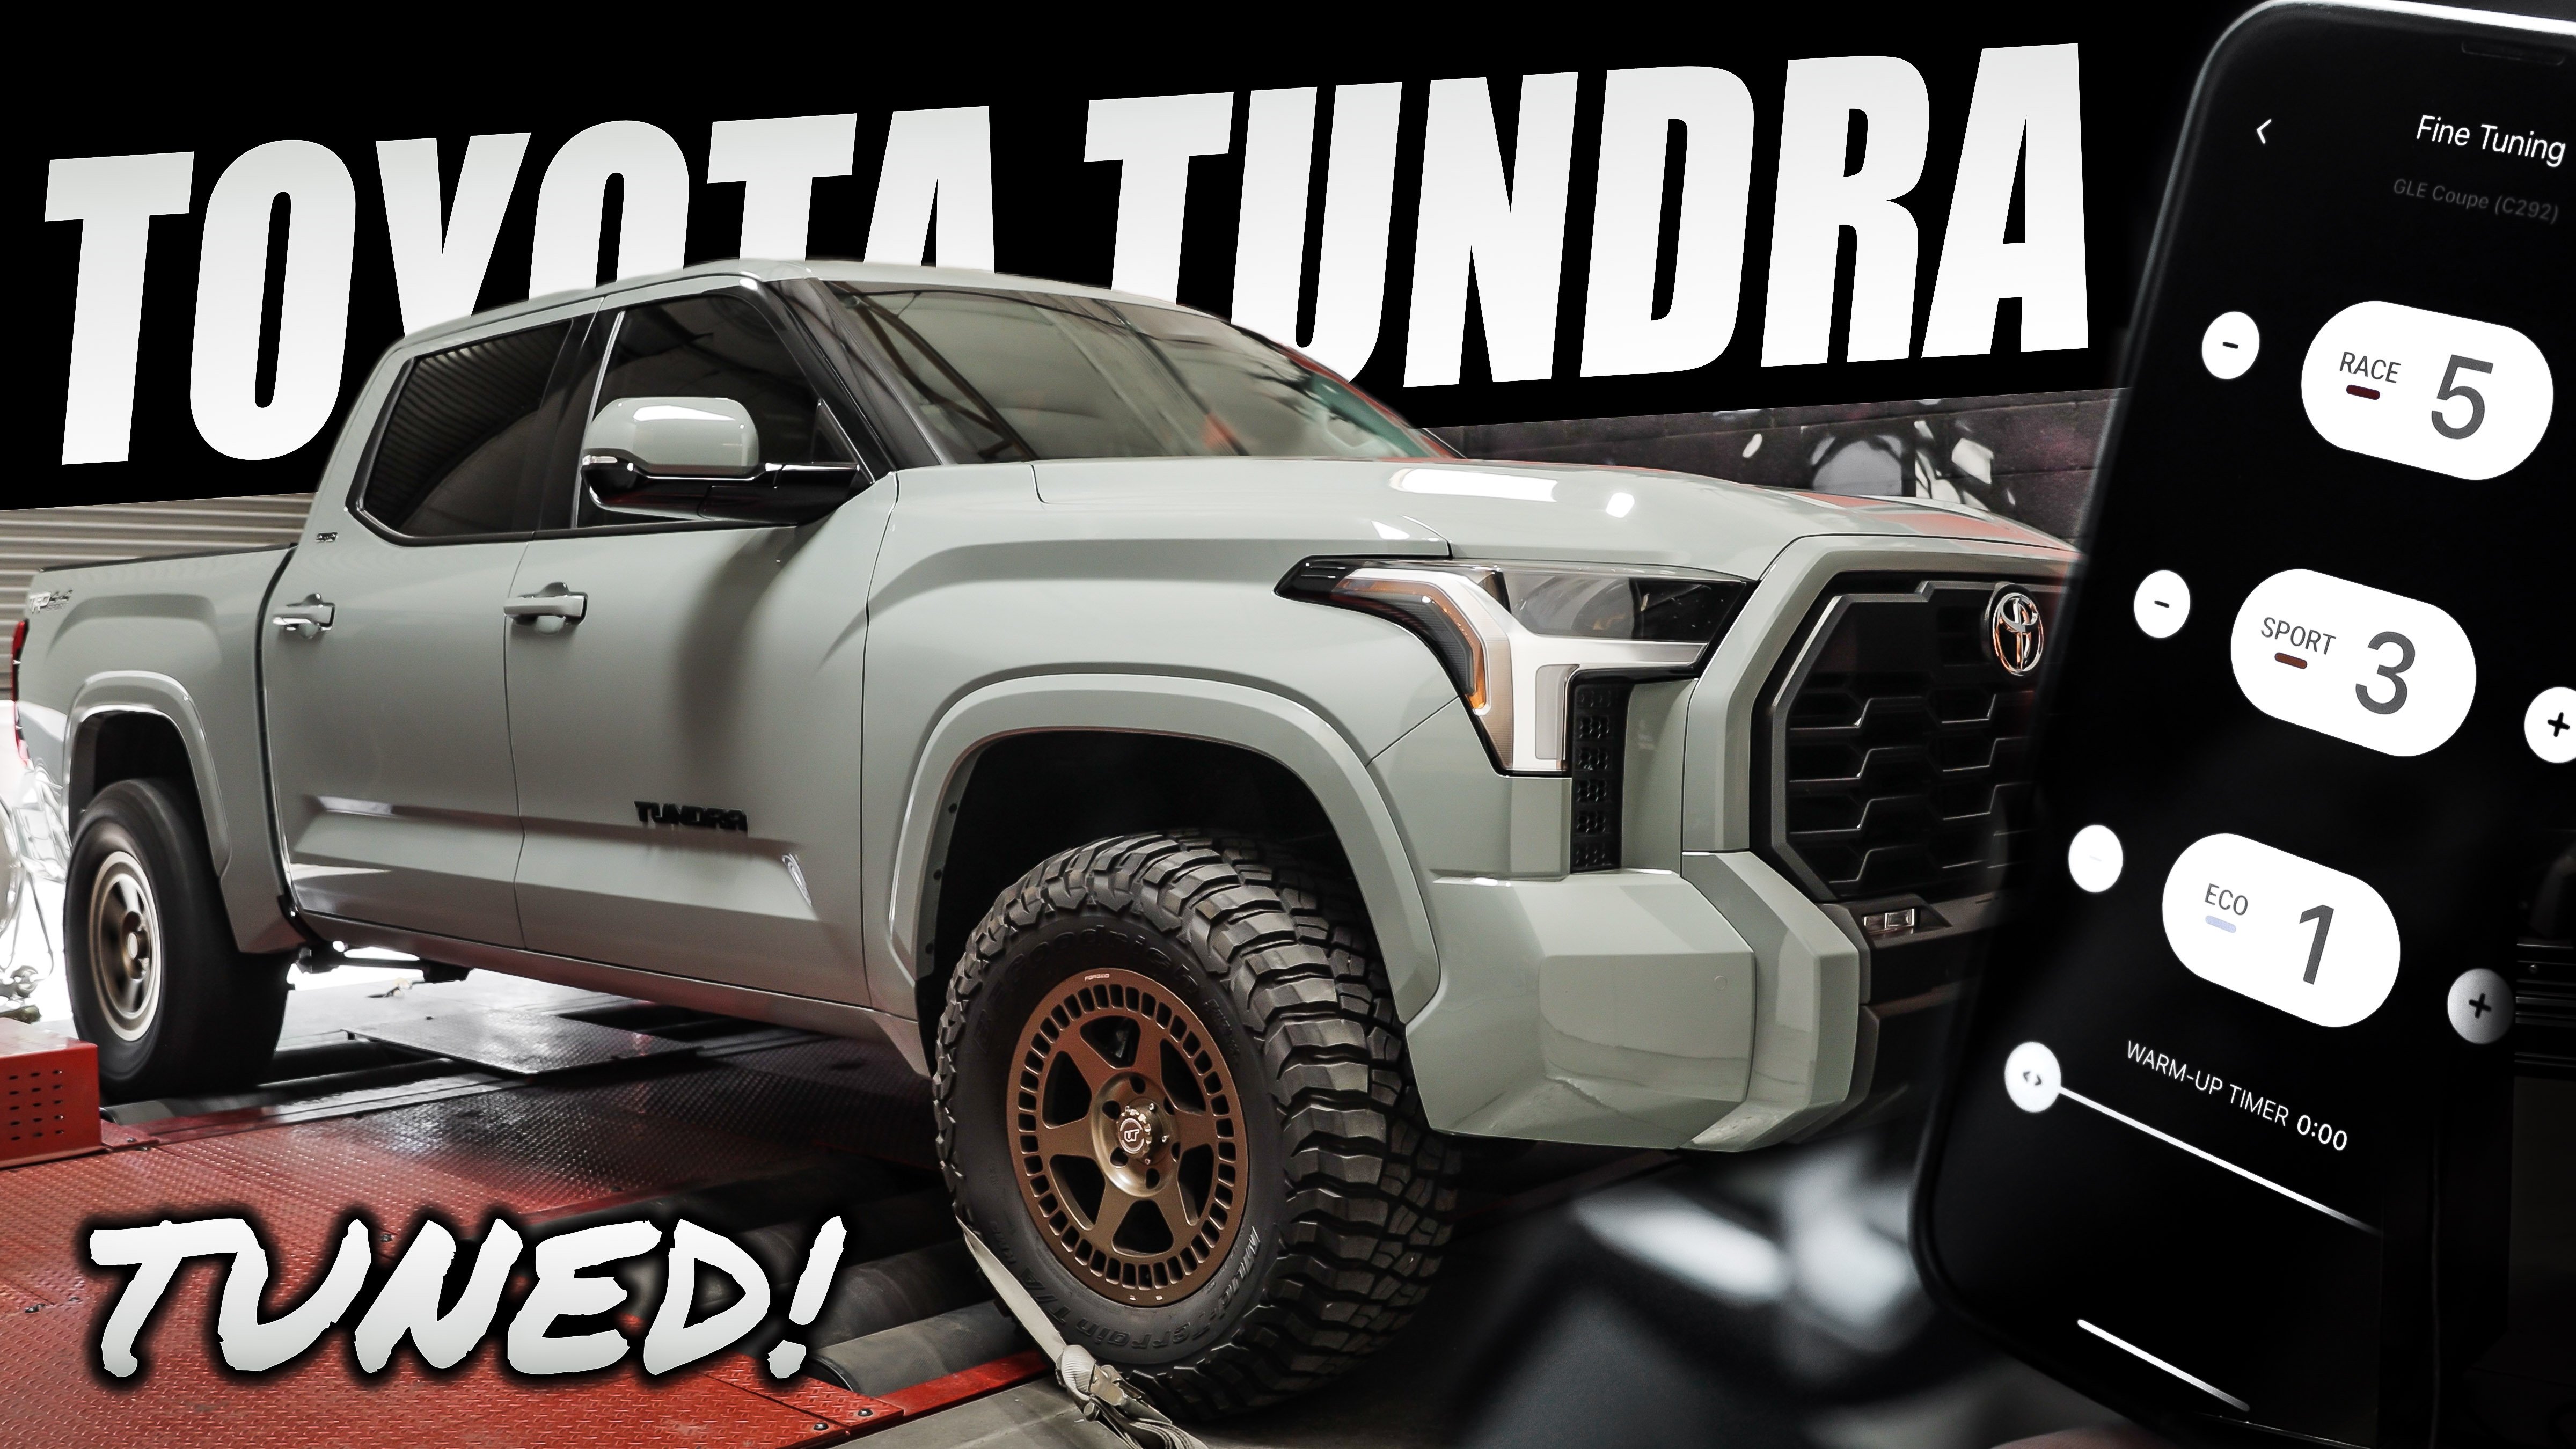 2022 Toyota Tundra Makes Large Power Gains with Simple Tune | Video